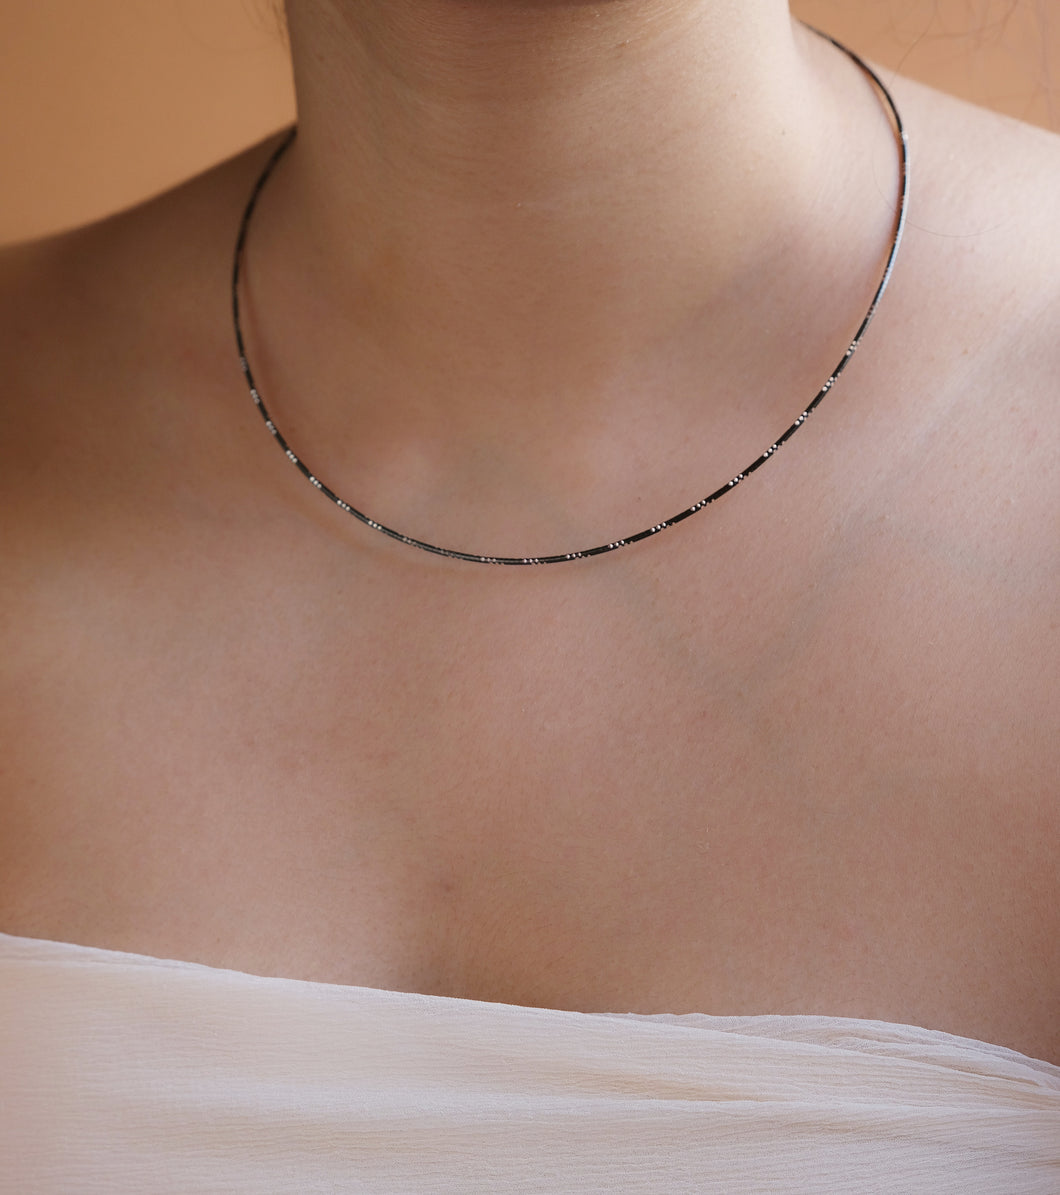 Black and silver necklace